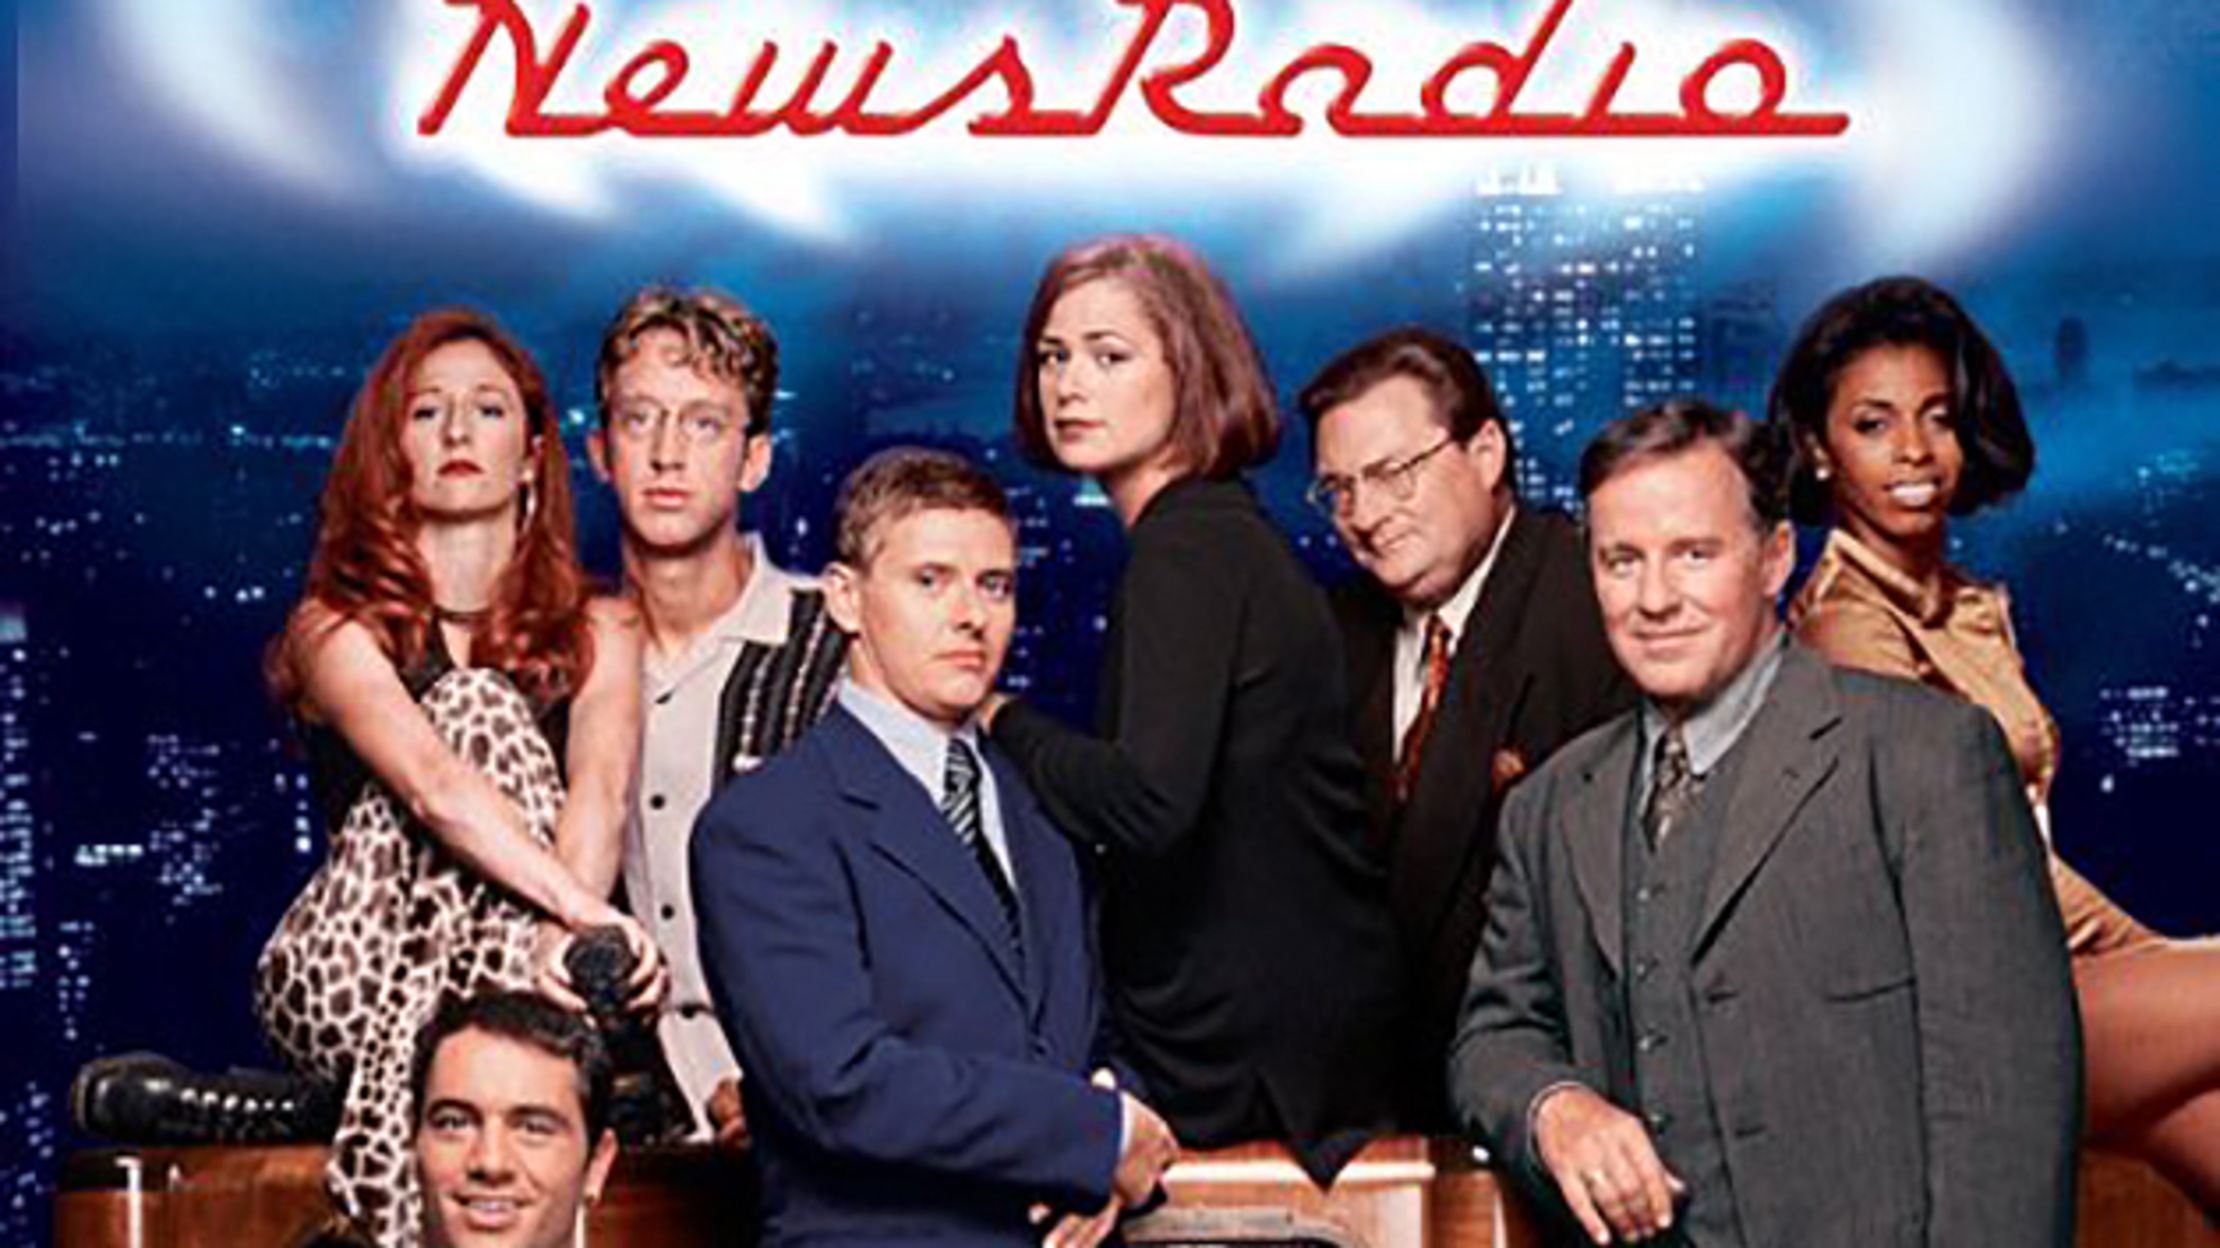 21 Things You Might Not Know About Newsradio Mental Floss